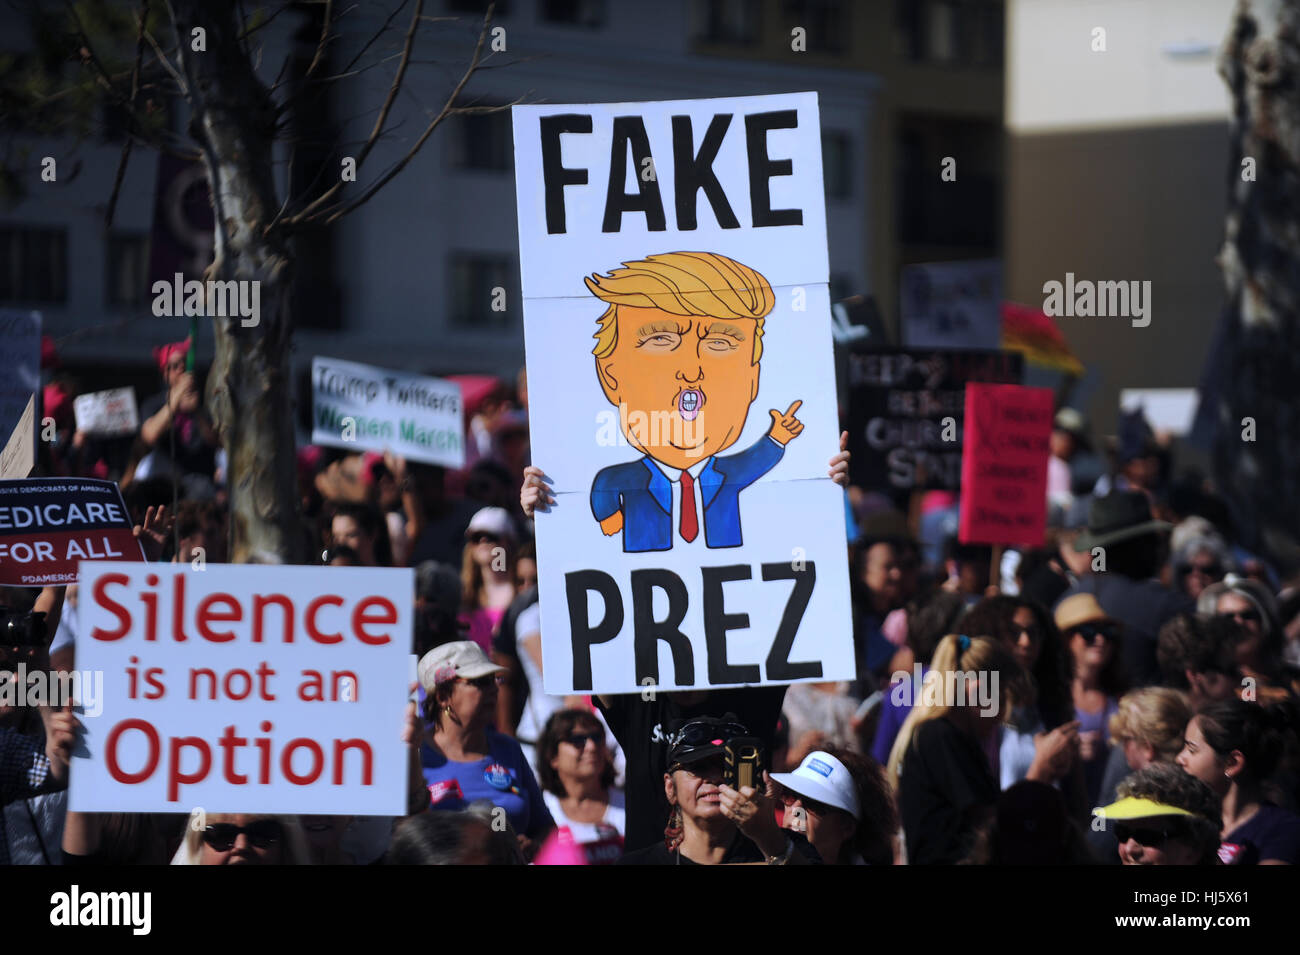 Orlando, United States. 21st Jan, 2017. January 21, 2017 - Orlando, Florida, United States - Thousands rally at Lake Eola Park in Orlando, Florida on January 21, 2017 for a Women's March in conjunction with the Women's March on Washington, the day after the inauguration of Donald Trump as the country's 45th president. Credit: Paul Hennessy/Alamy Live News Stock Photo